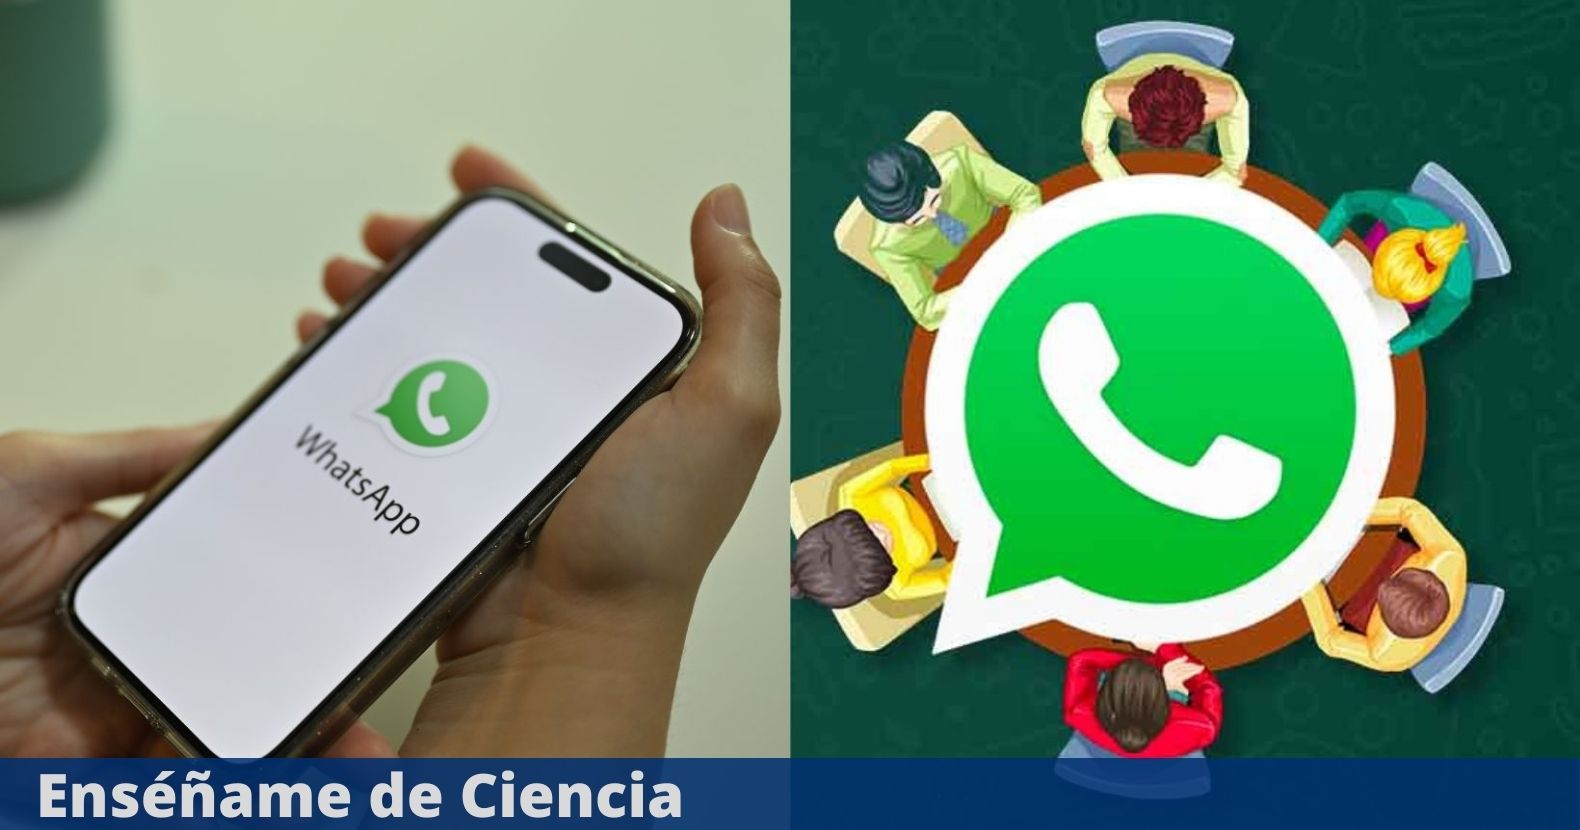 A new WhatsApp feature has arrived exclusively for group admins – Enseñame de Ciencia